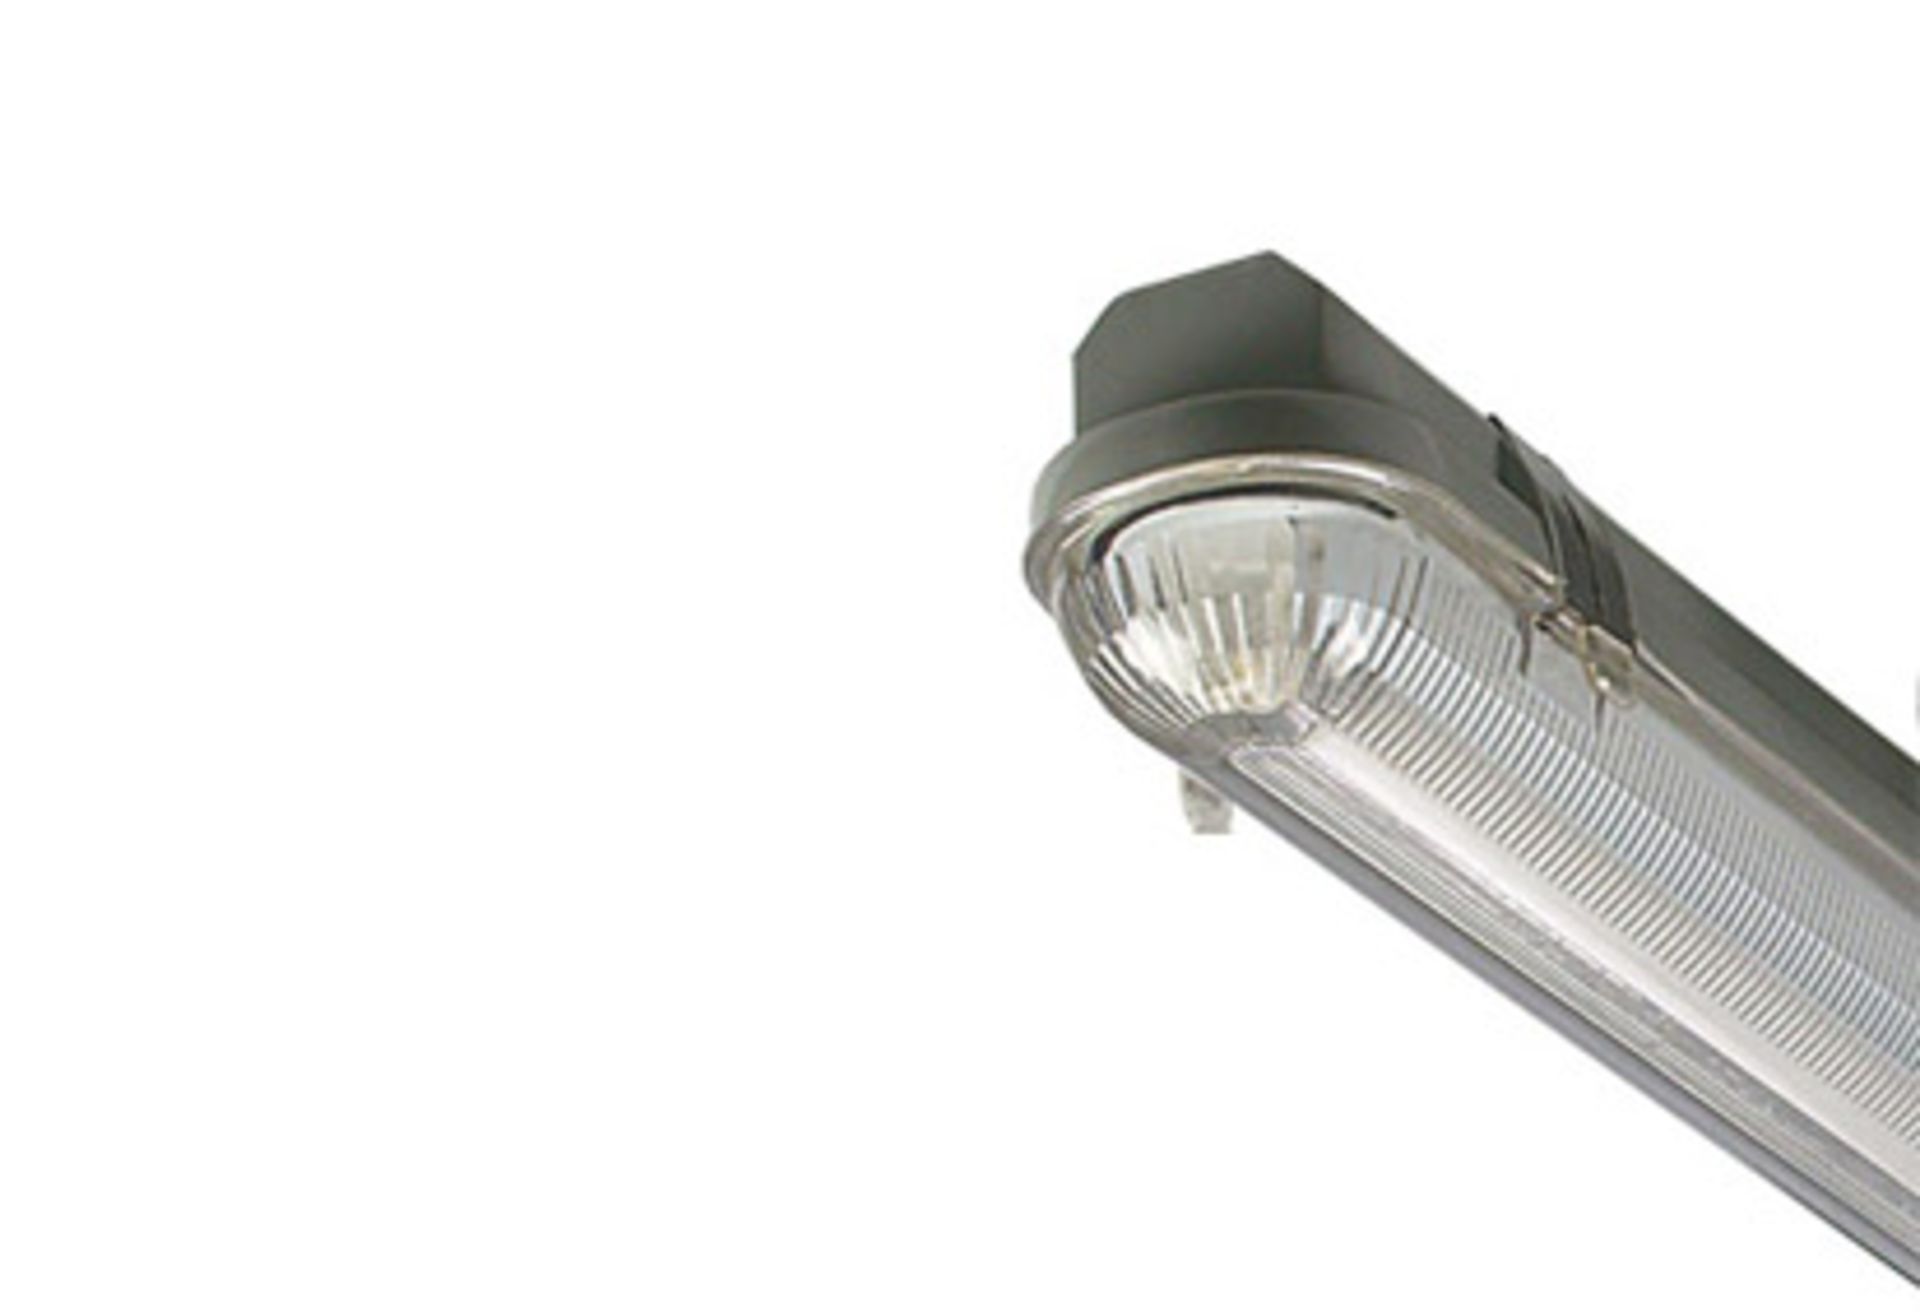 3 1x54w IP65 Waterproof Fittings, no lamps, product code TQCRF154FZ-1 (located on mezzanine) - Image 6 of 7